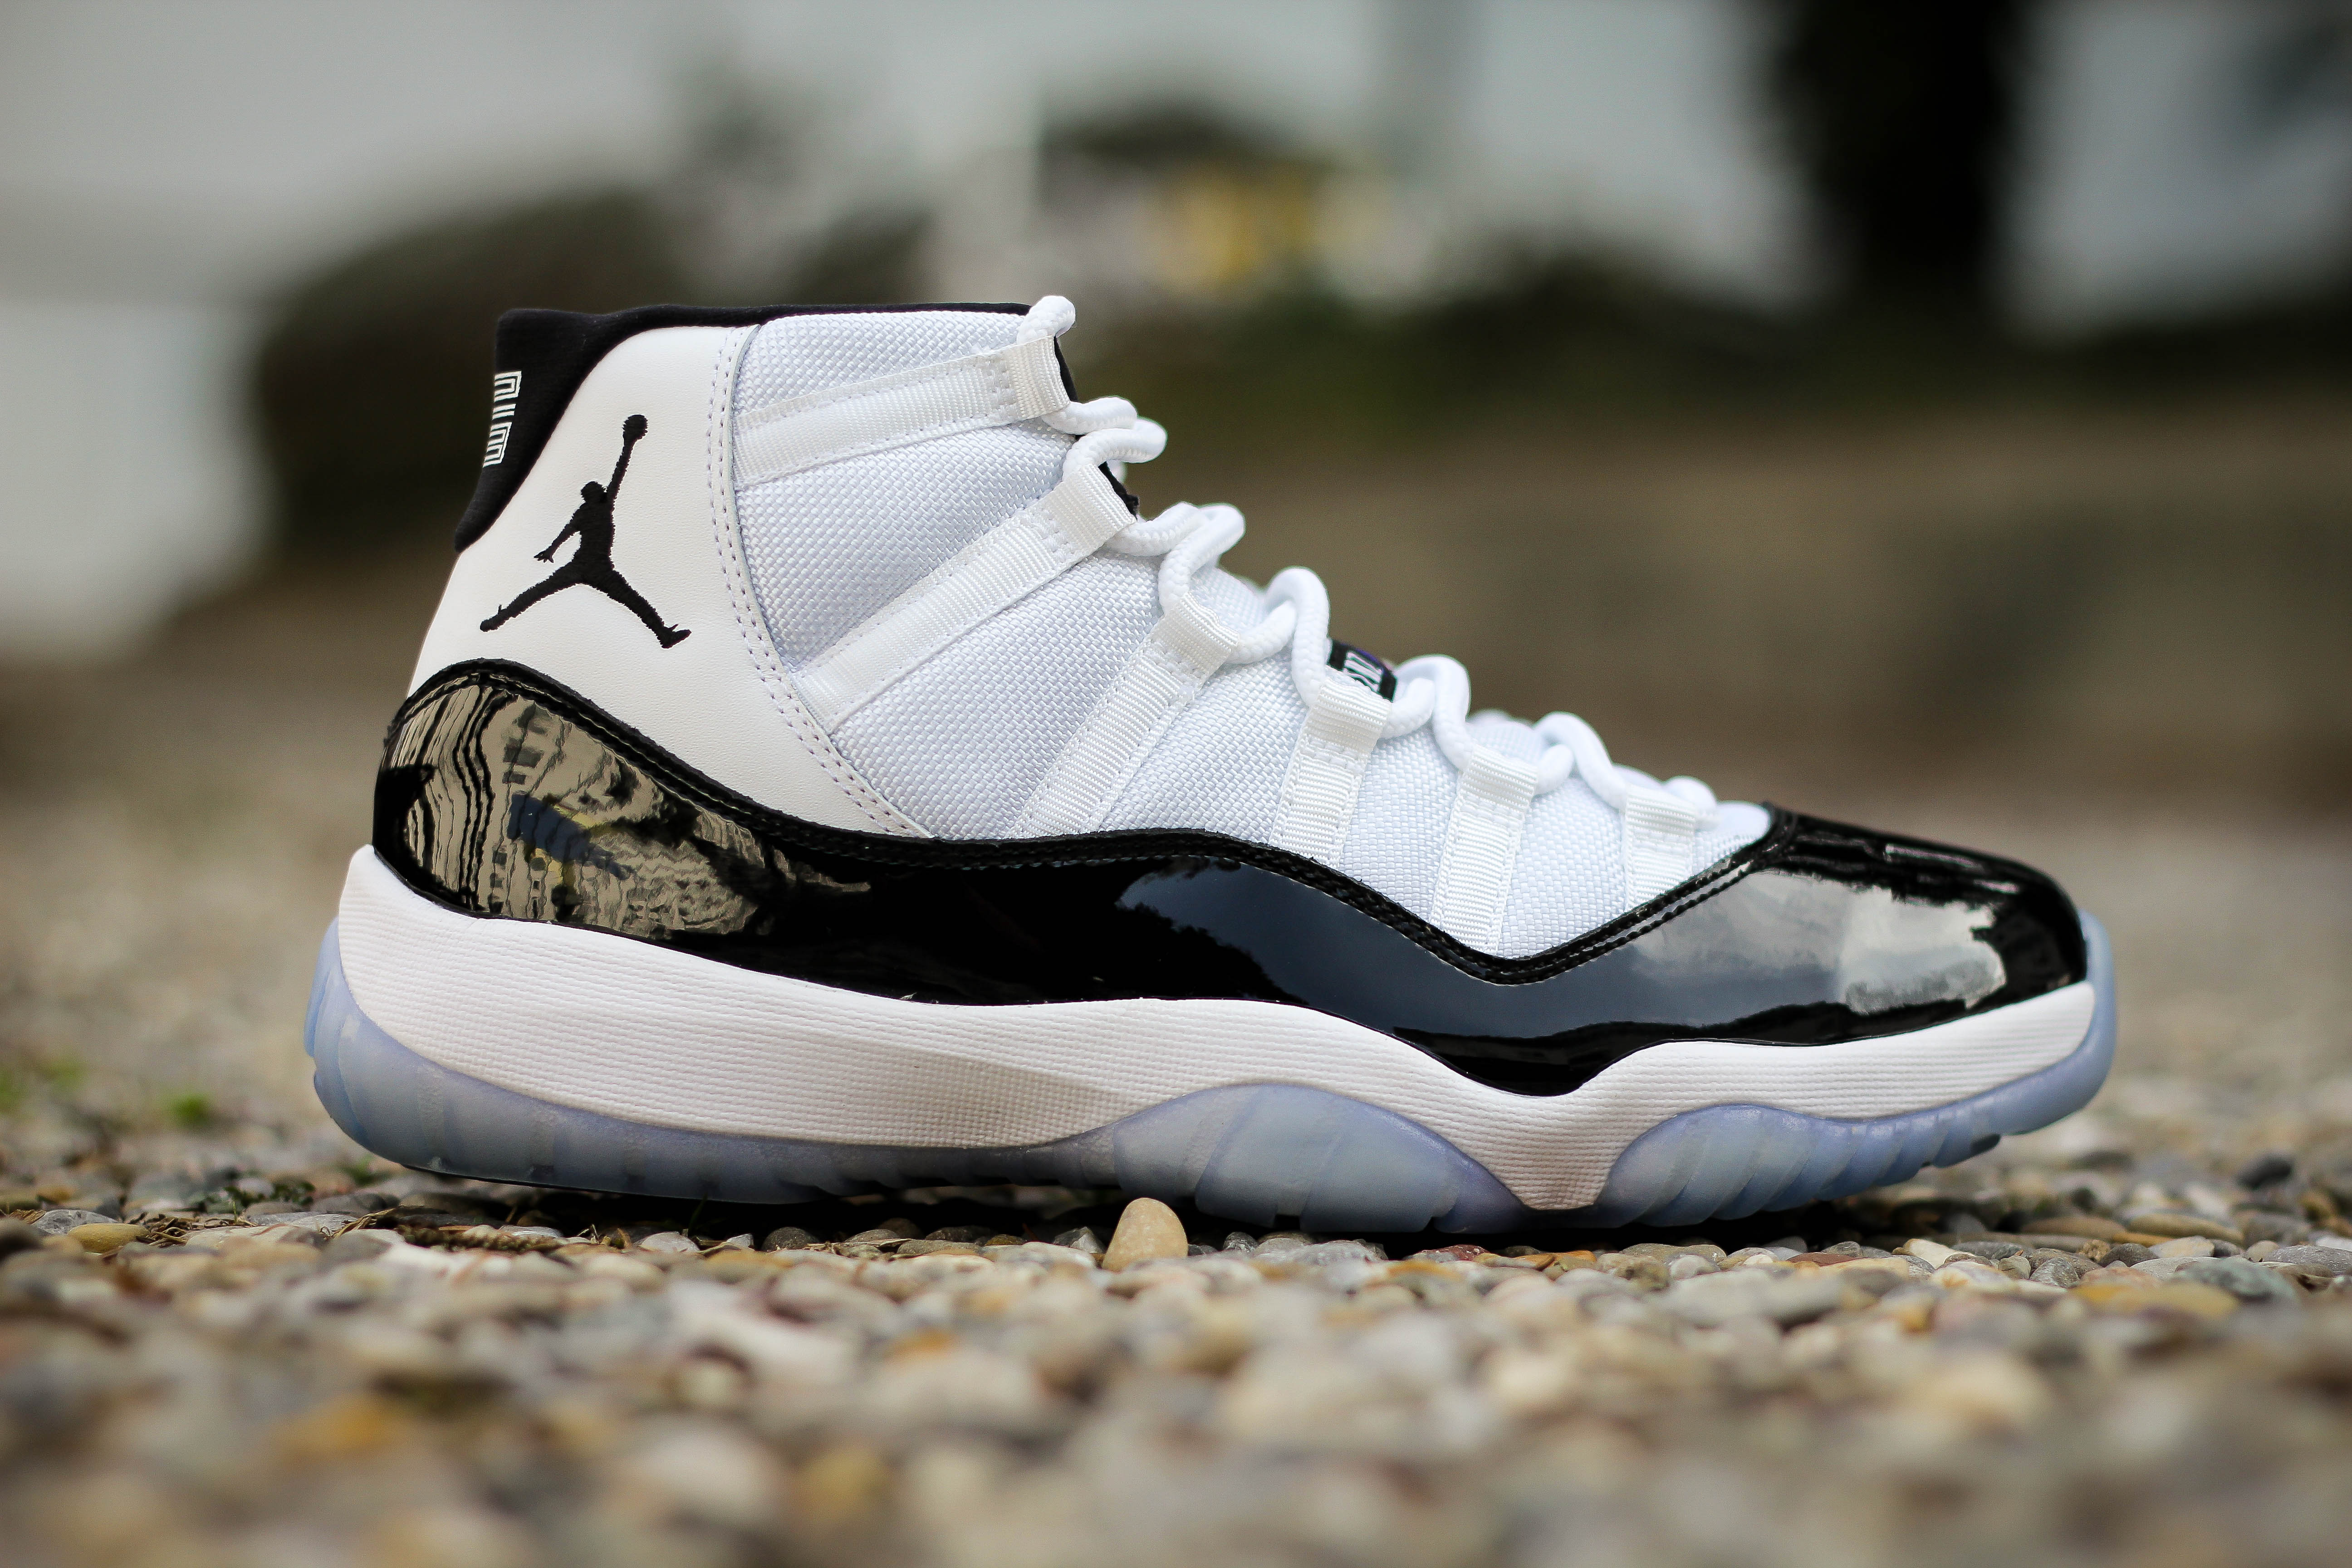 Foot Locker Shoes Jordans 11. Best Fashion of Shoes Collections